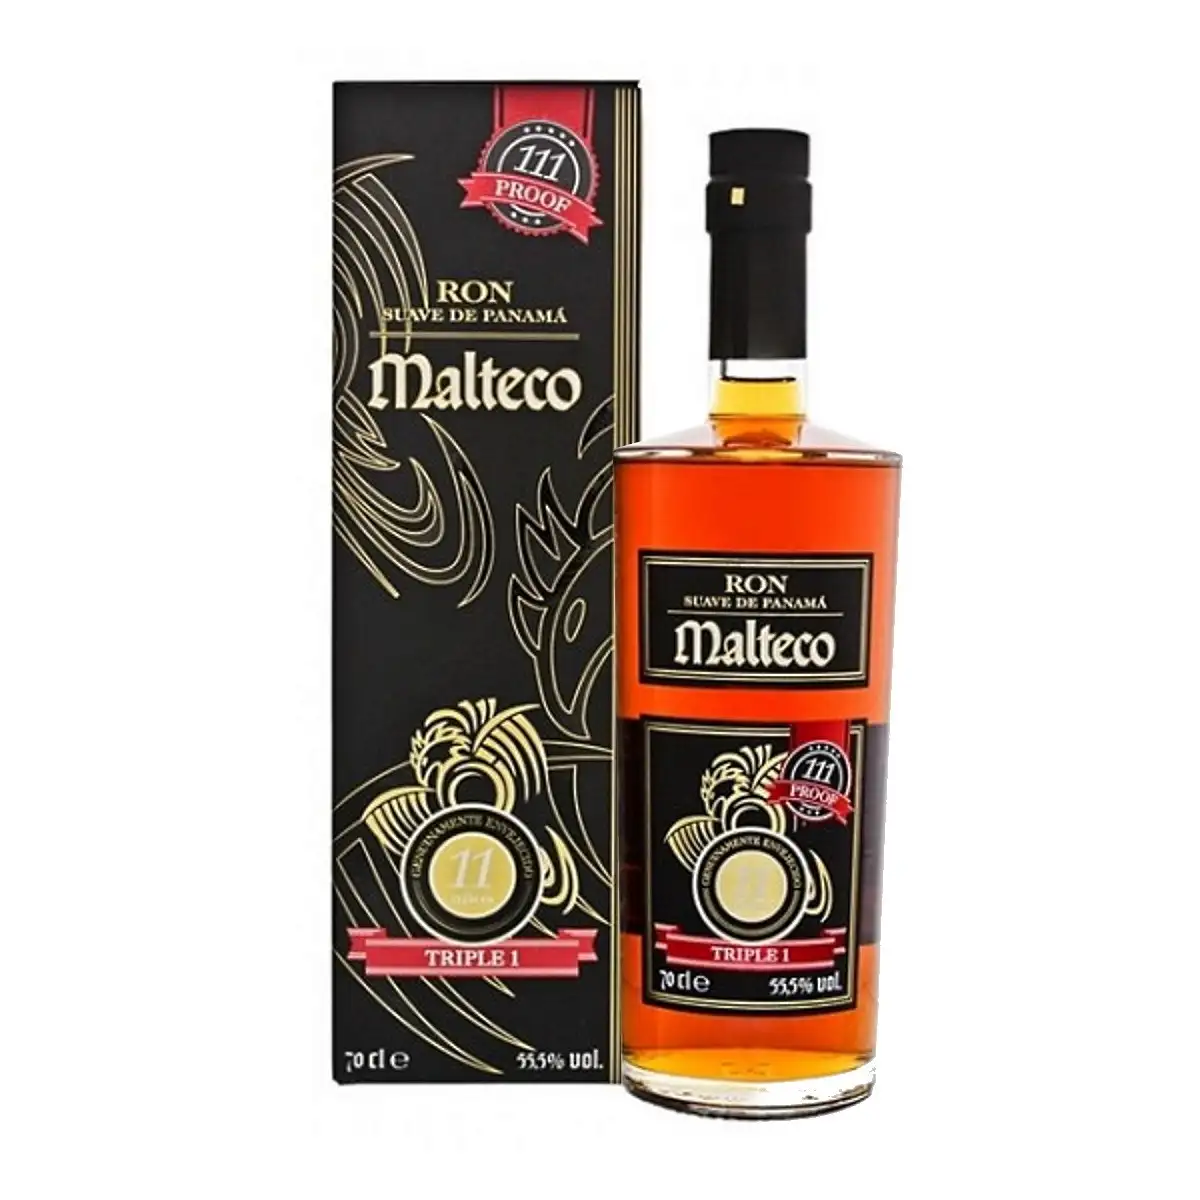 Image of the front of the bottle of the rum Malteco Triple 1